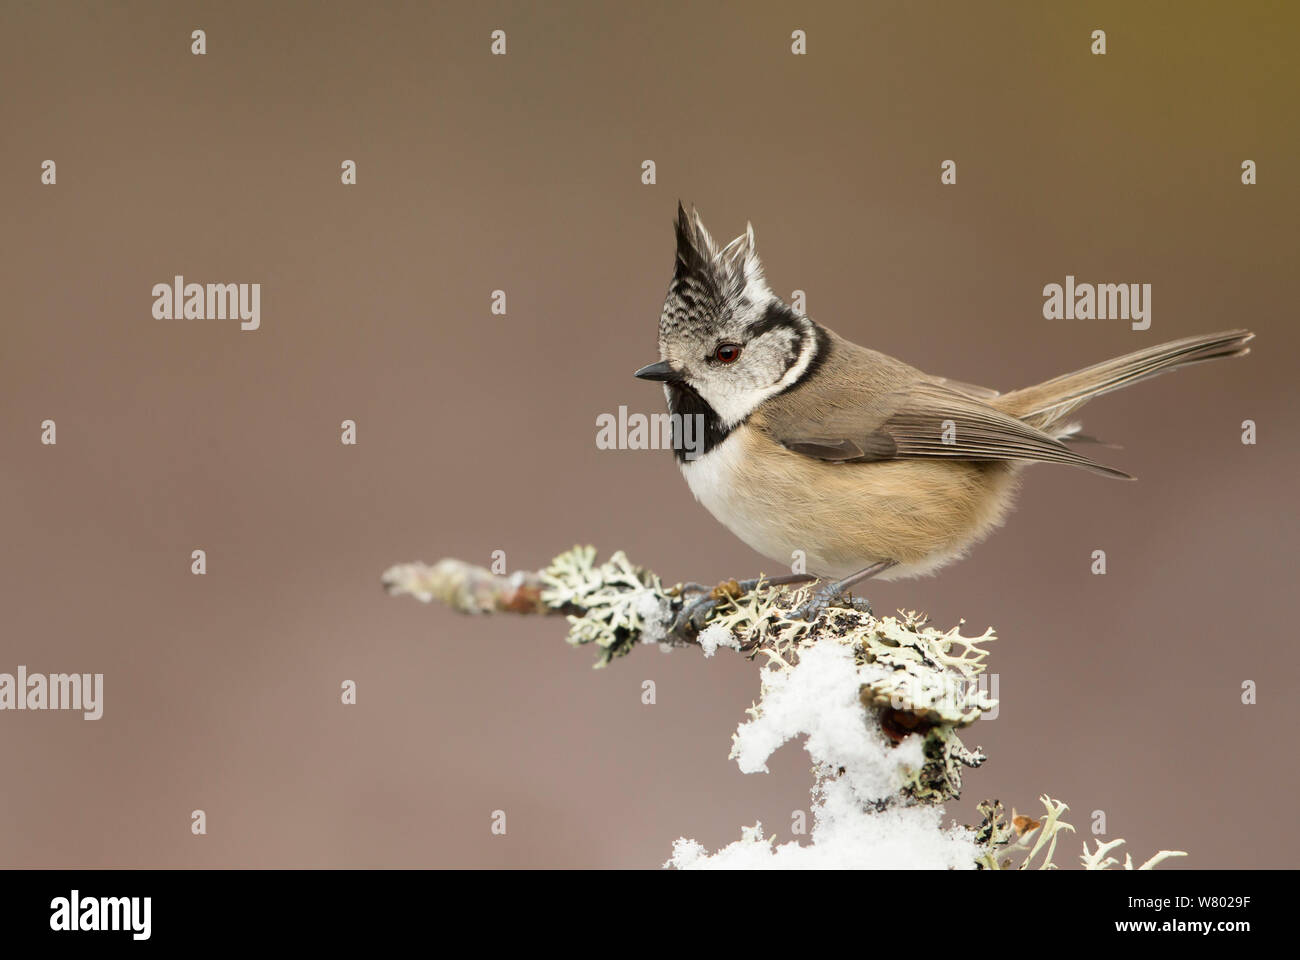 Crested tit (Lophophanes cristatus) perched on snowy conifer branch, Scotland, March Stock Photo